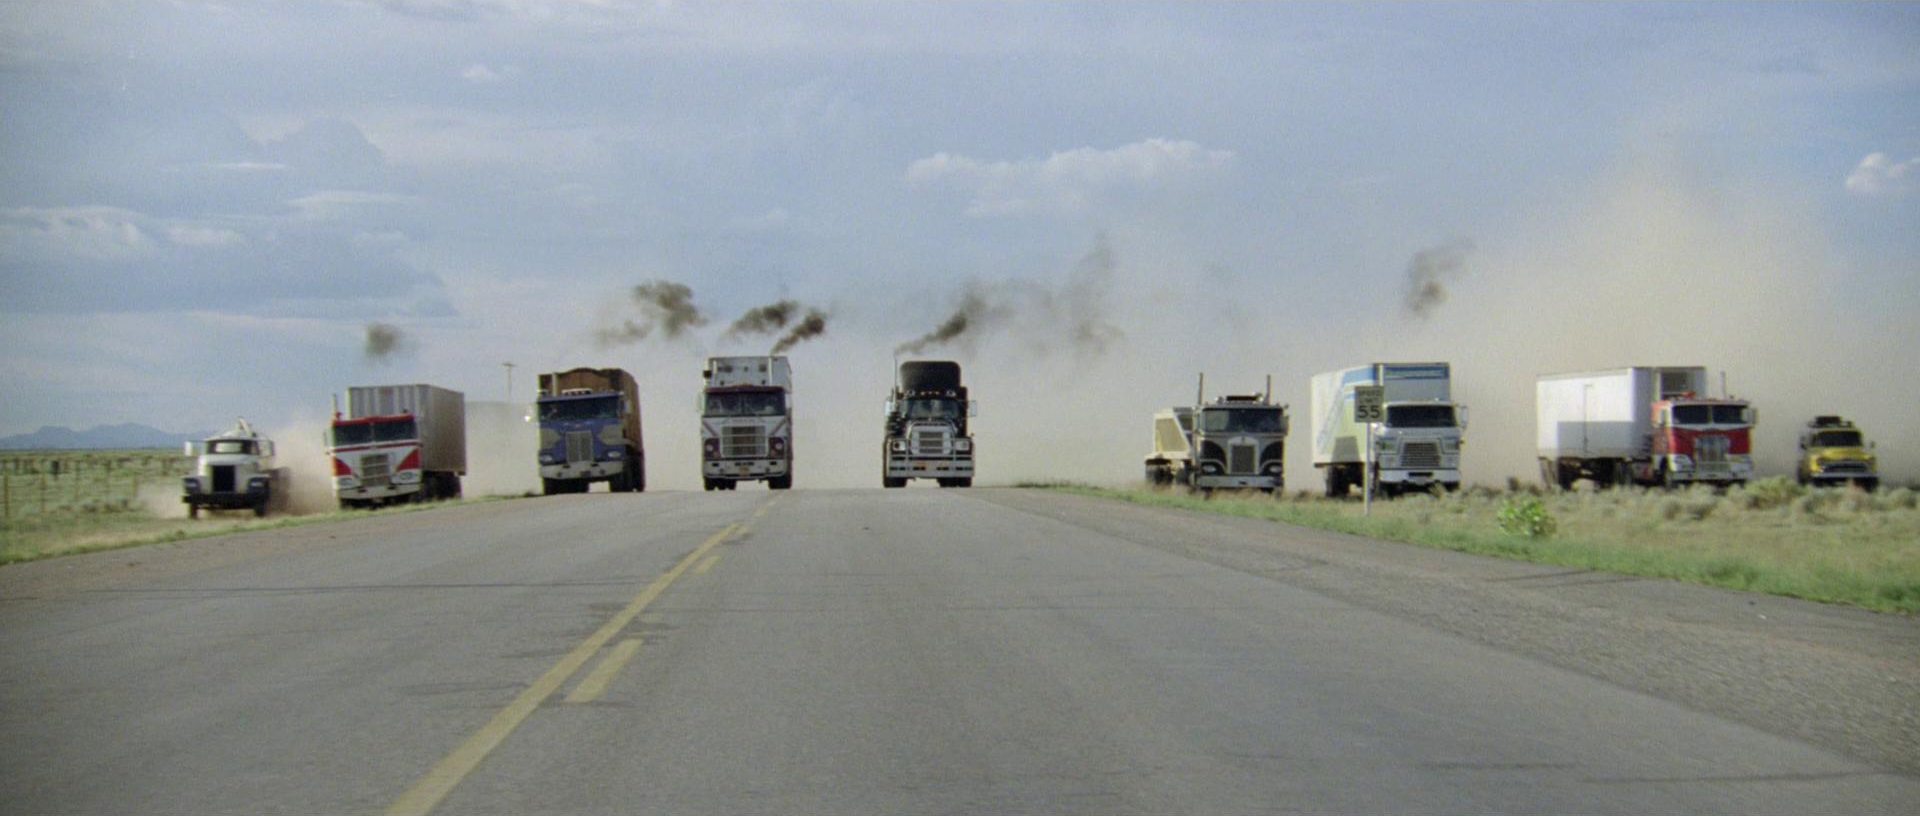 Frontal view of parallel trucks on the highway horizon.